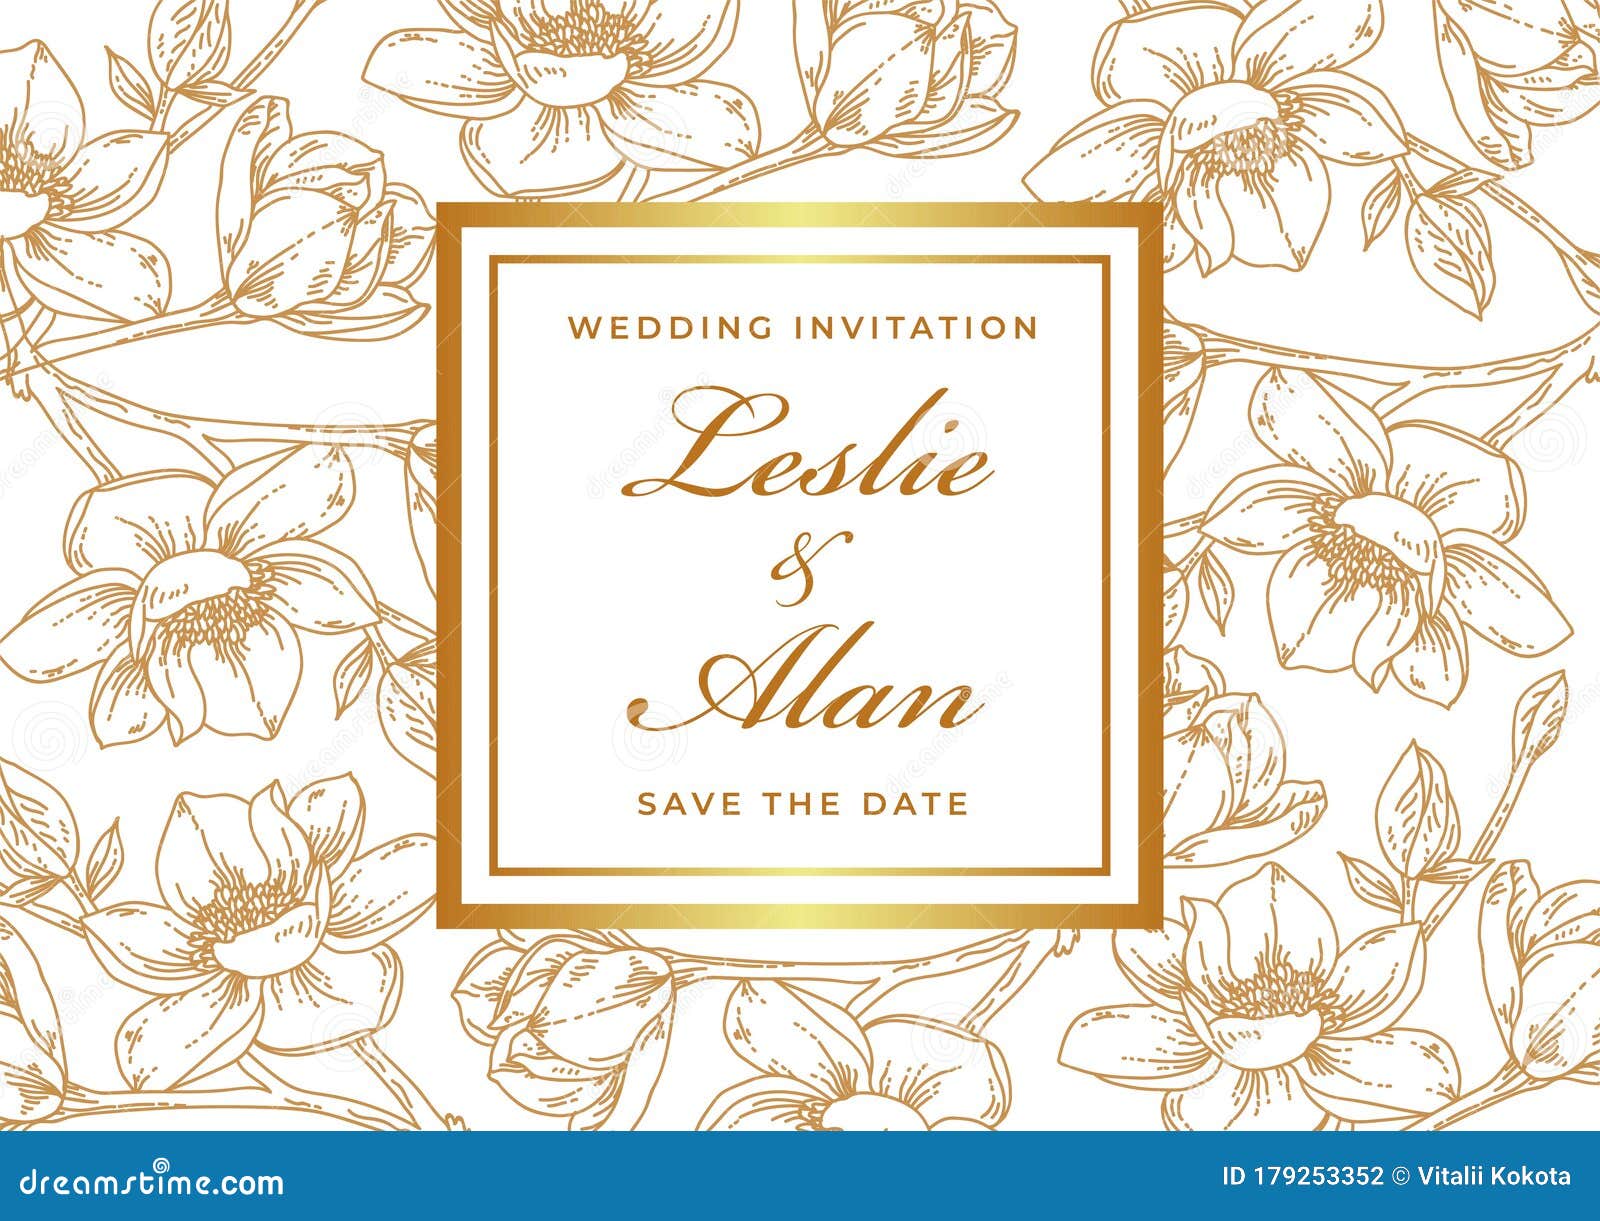 Save the Date, Wedding Invitation Card with Wreath Flower Template. Flower  Floral Background Stock Vector - Illustration of border, elegant: 179253352